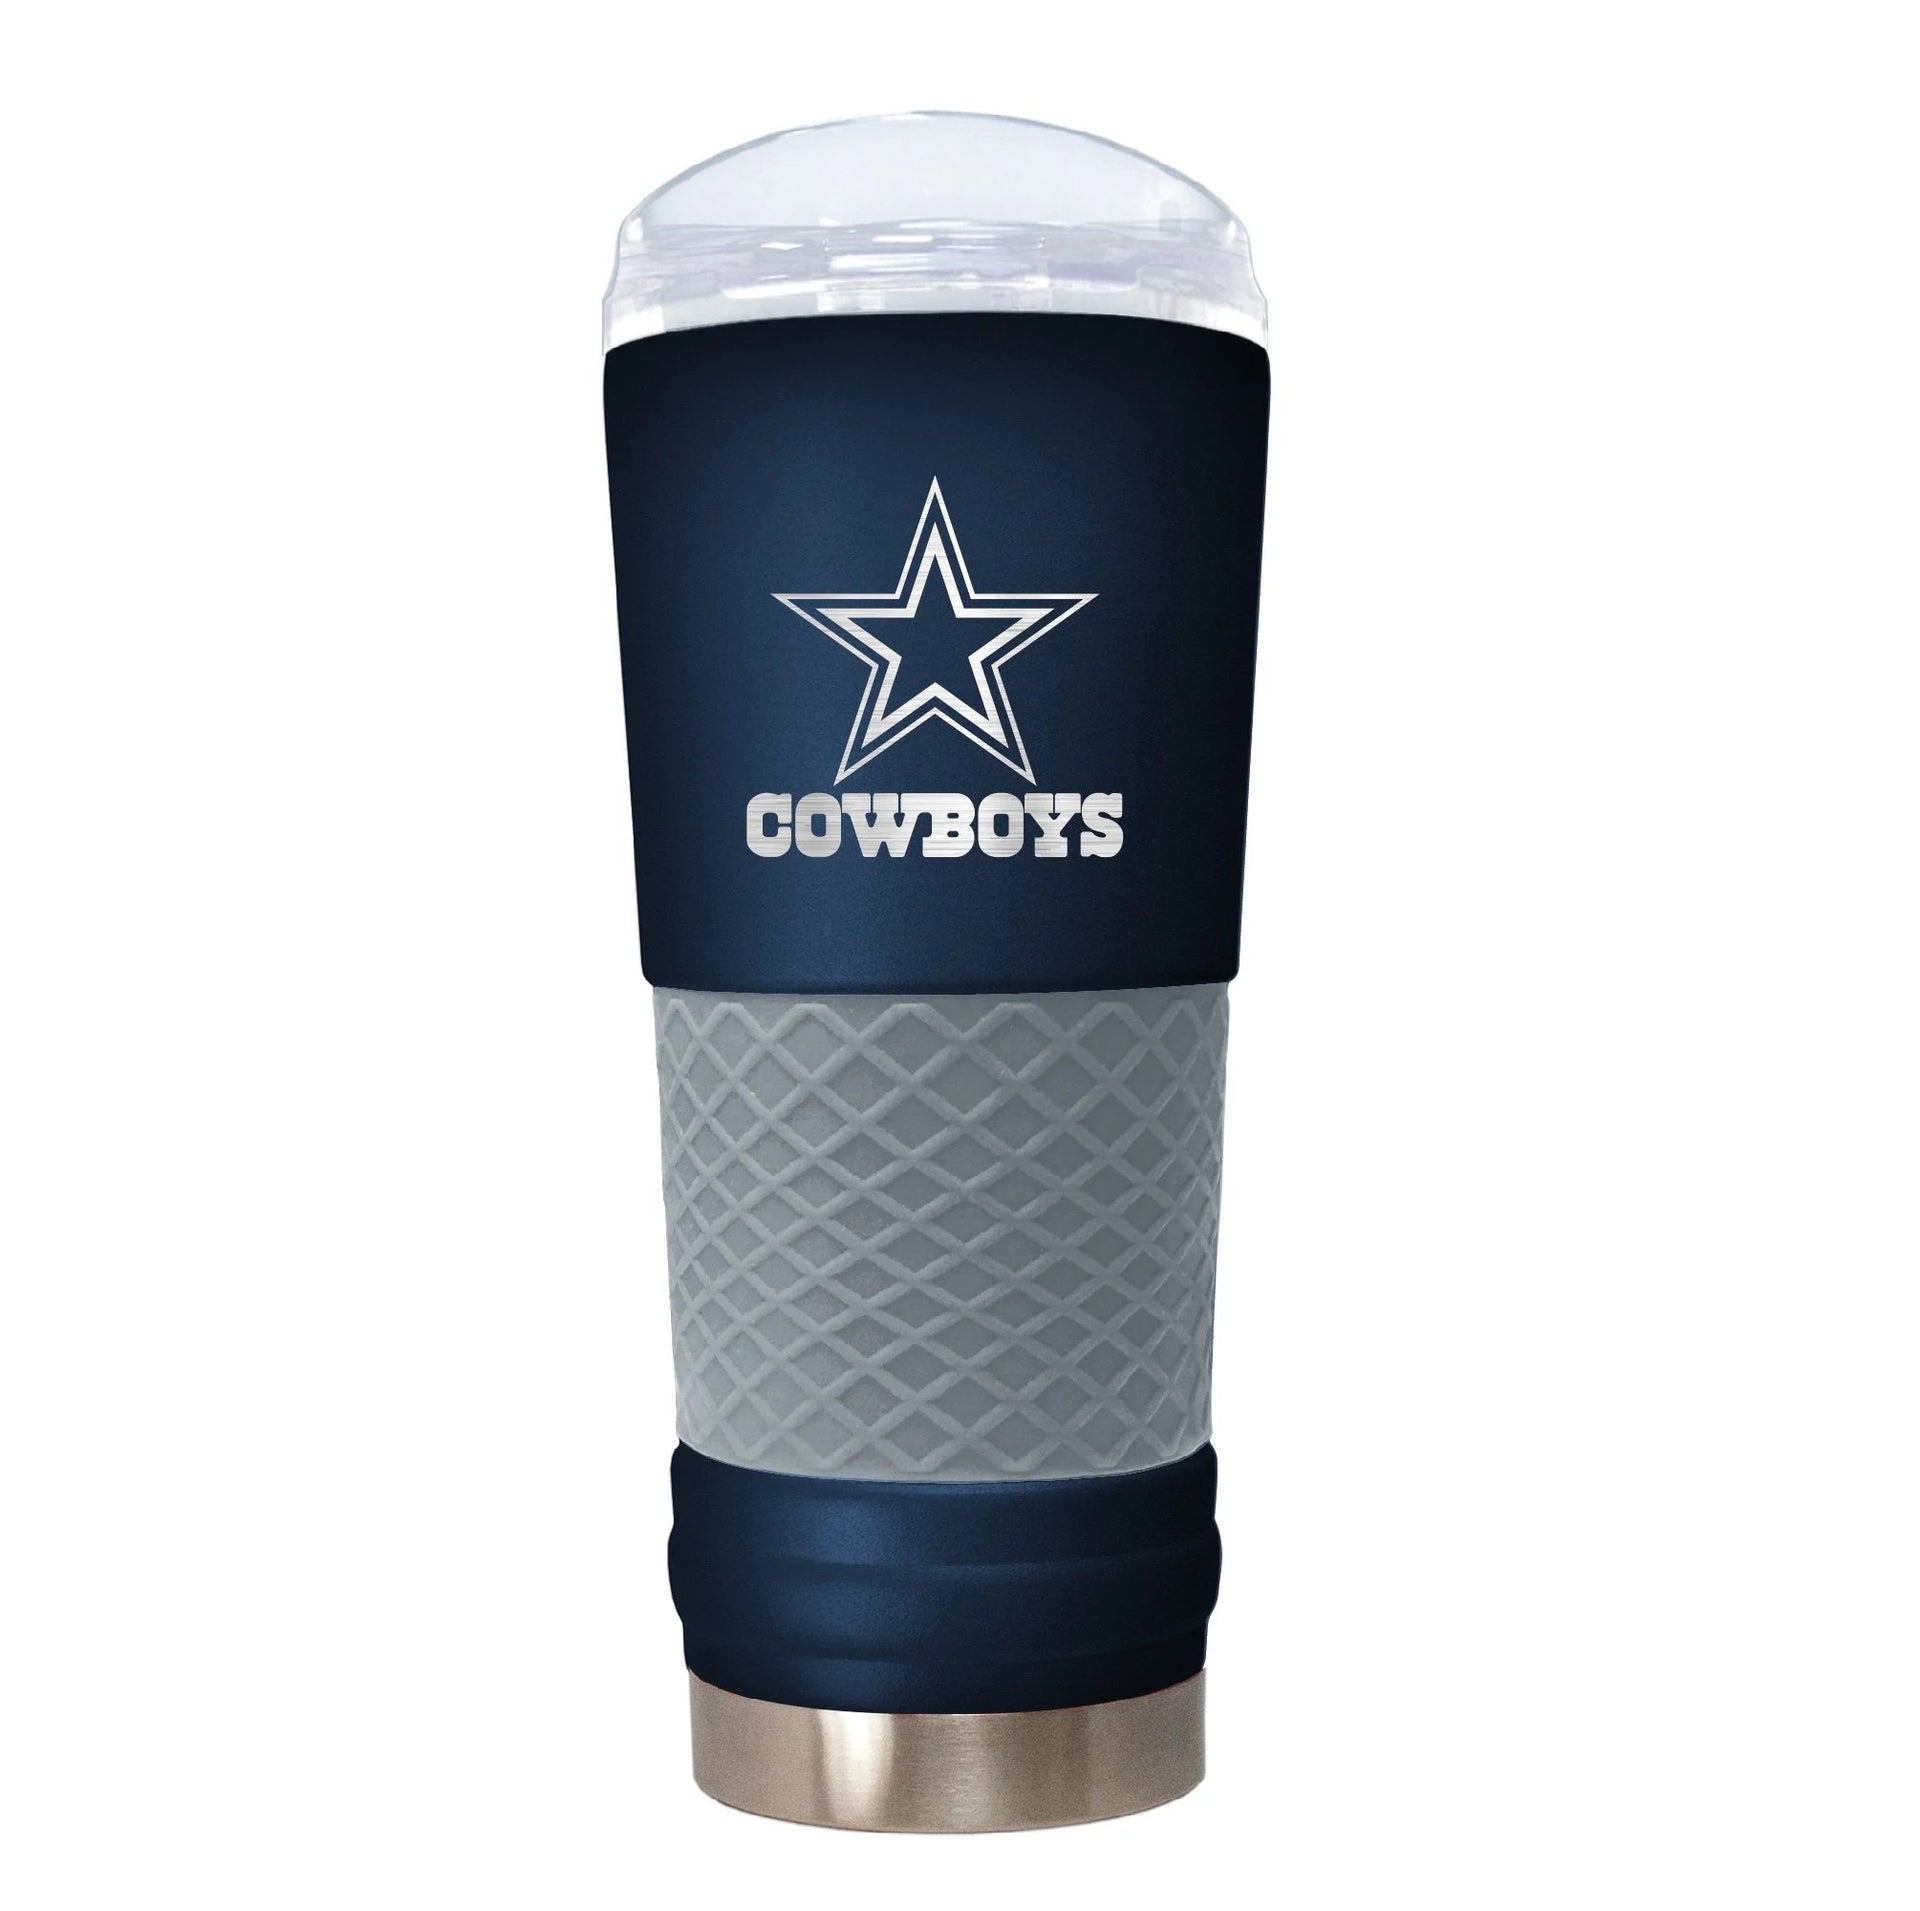 1974 Dallas Cowboys Artwork: 12 oz Stainless Steel Can Insulator